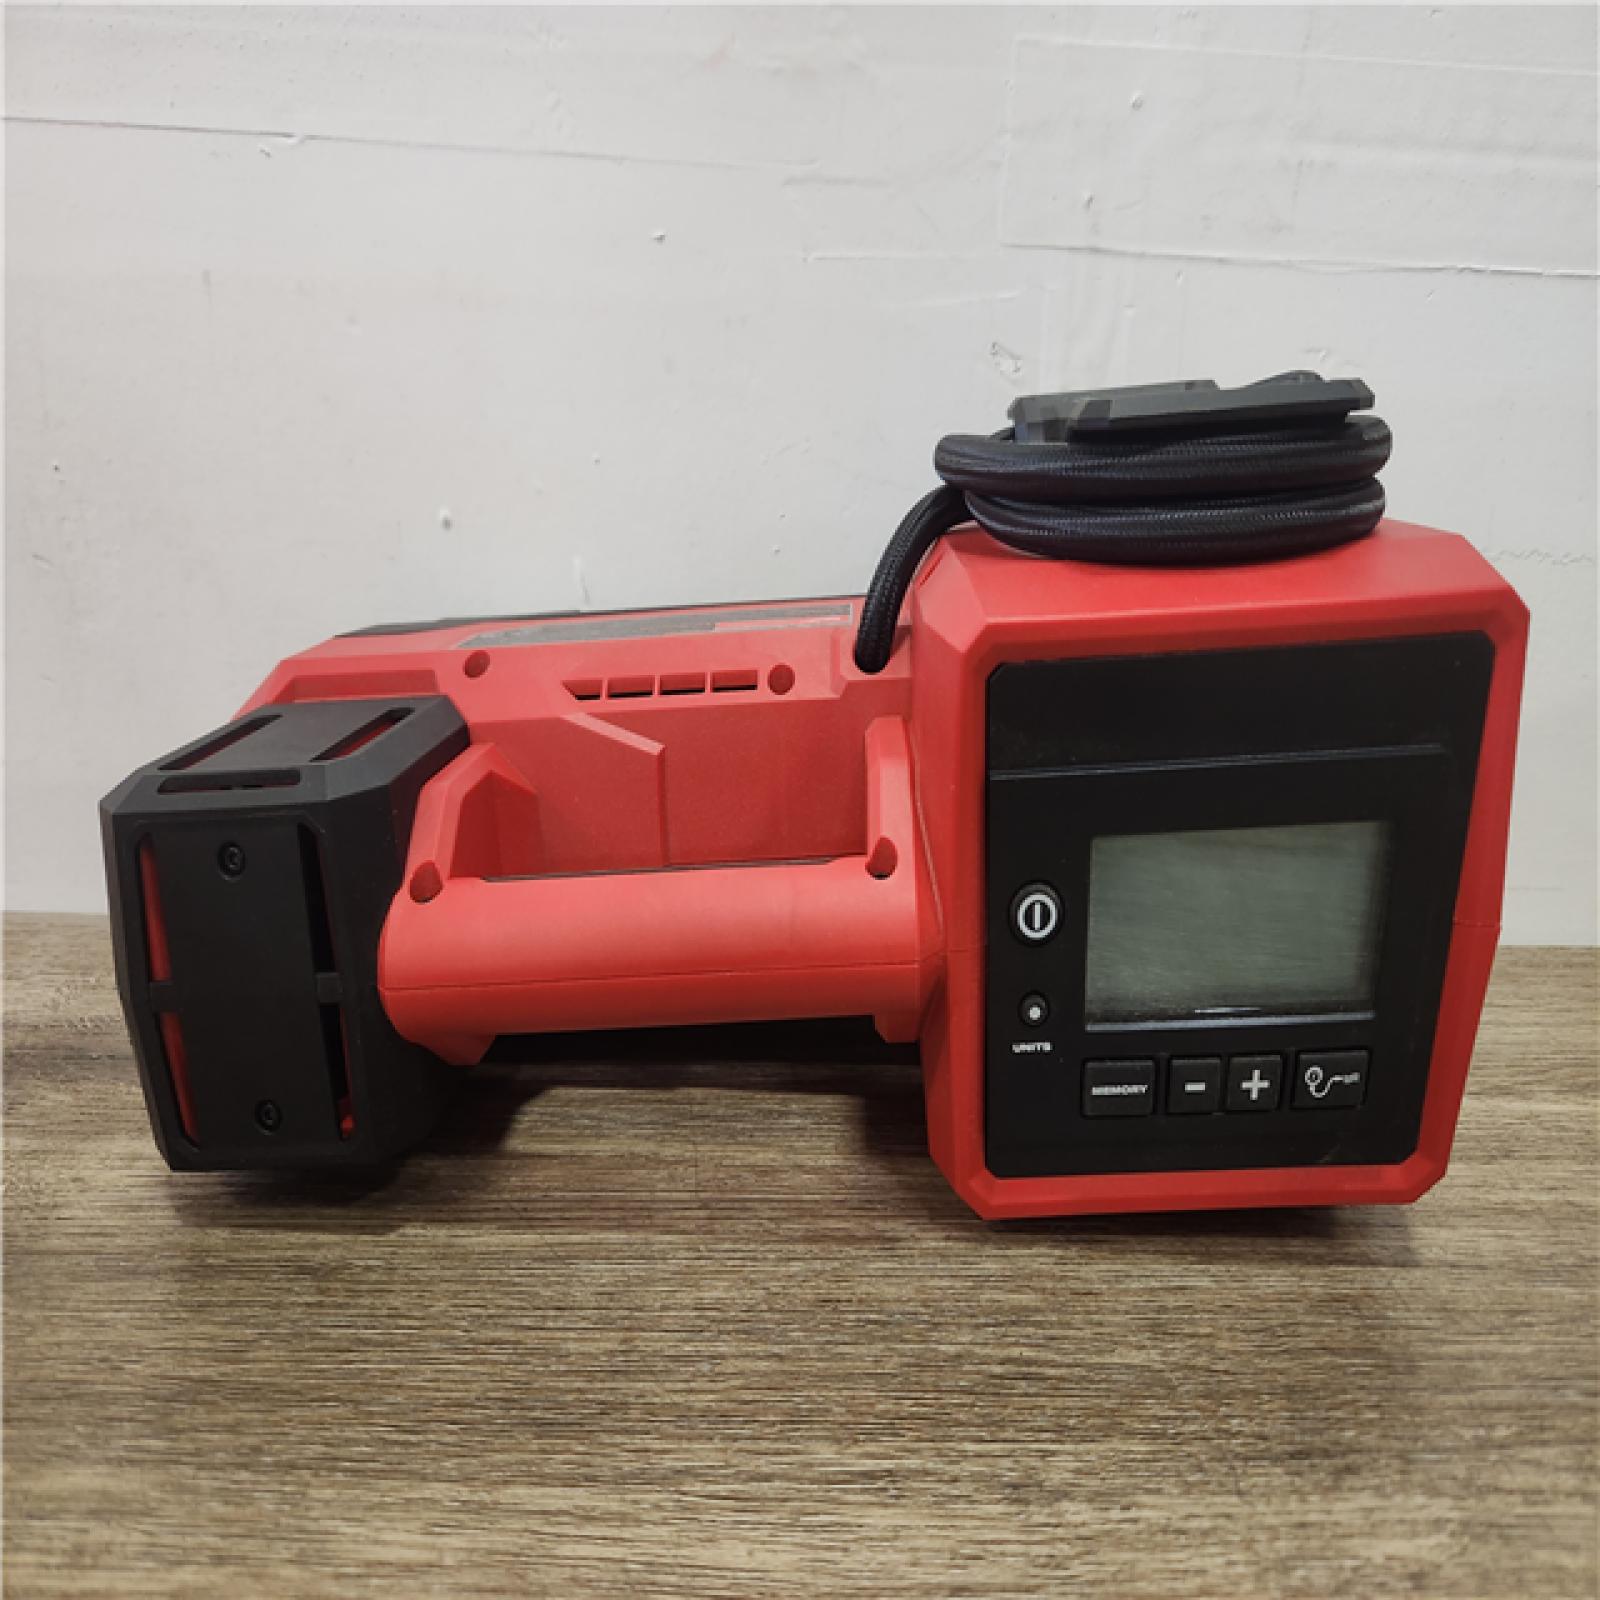 Phoenix Location NEW Milwaukee M18 18-Volt Lithium-Ion Cordless Electric Portable Inflator (Tool-Only)